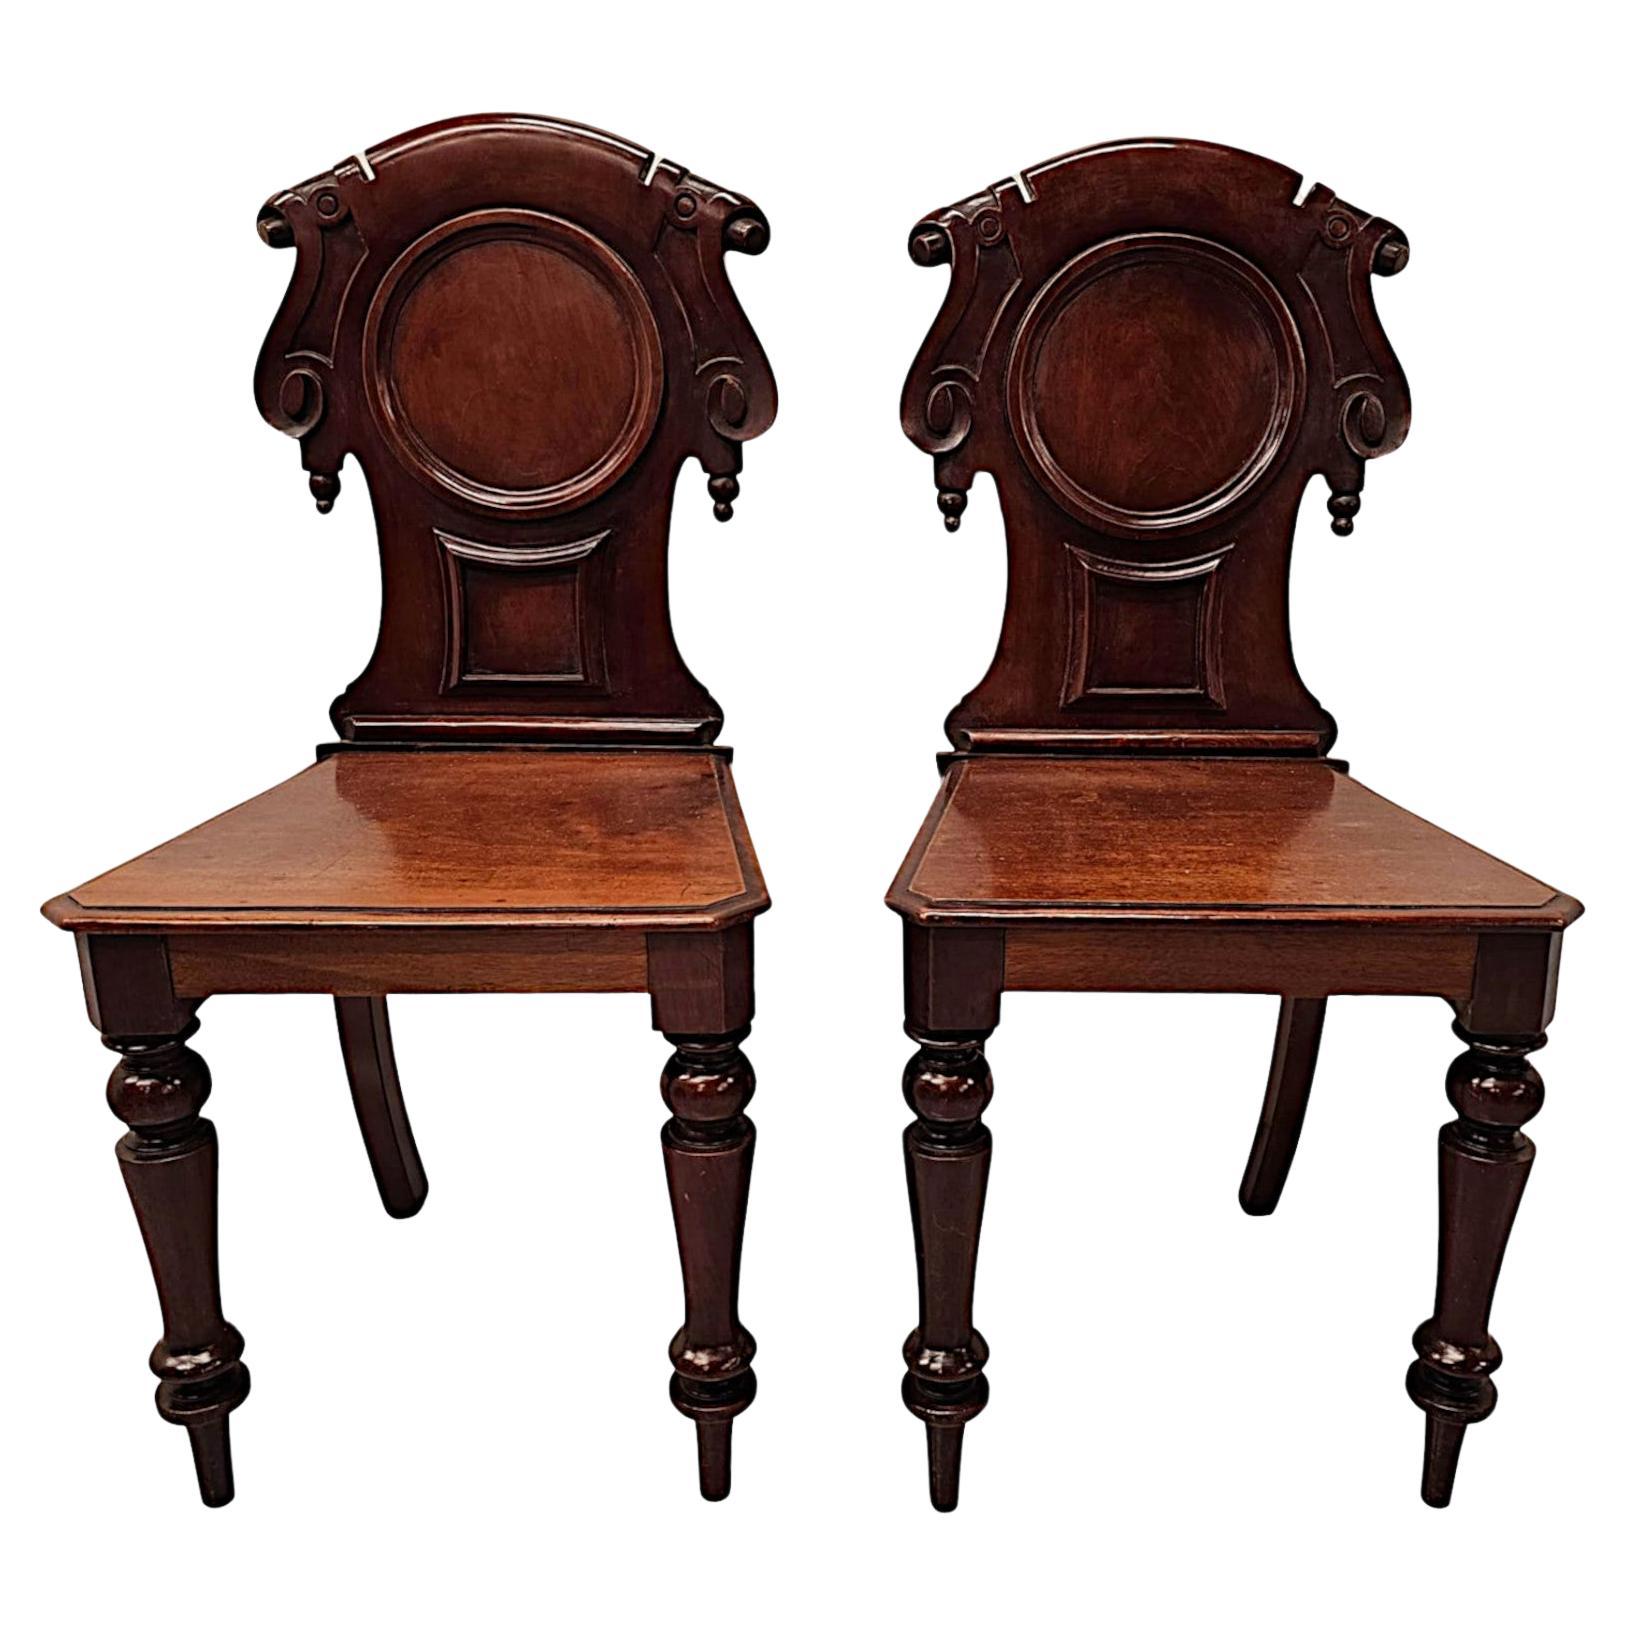 A Very Fine Pair of 19th Century Mahogany Hall Chairs For Sale